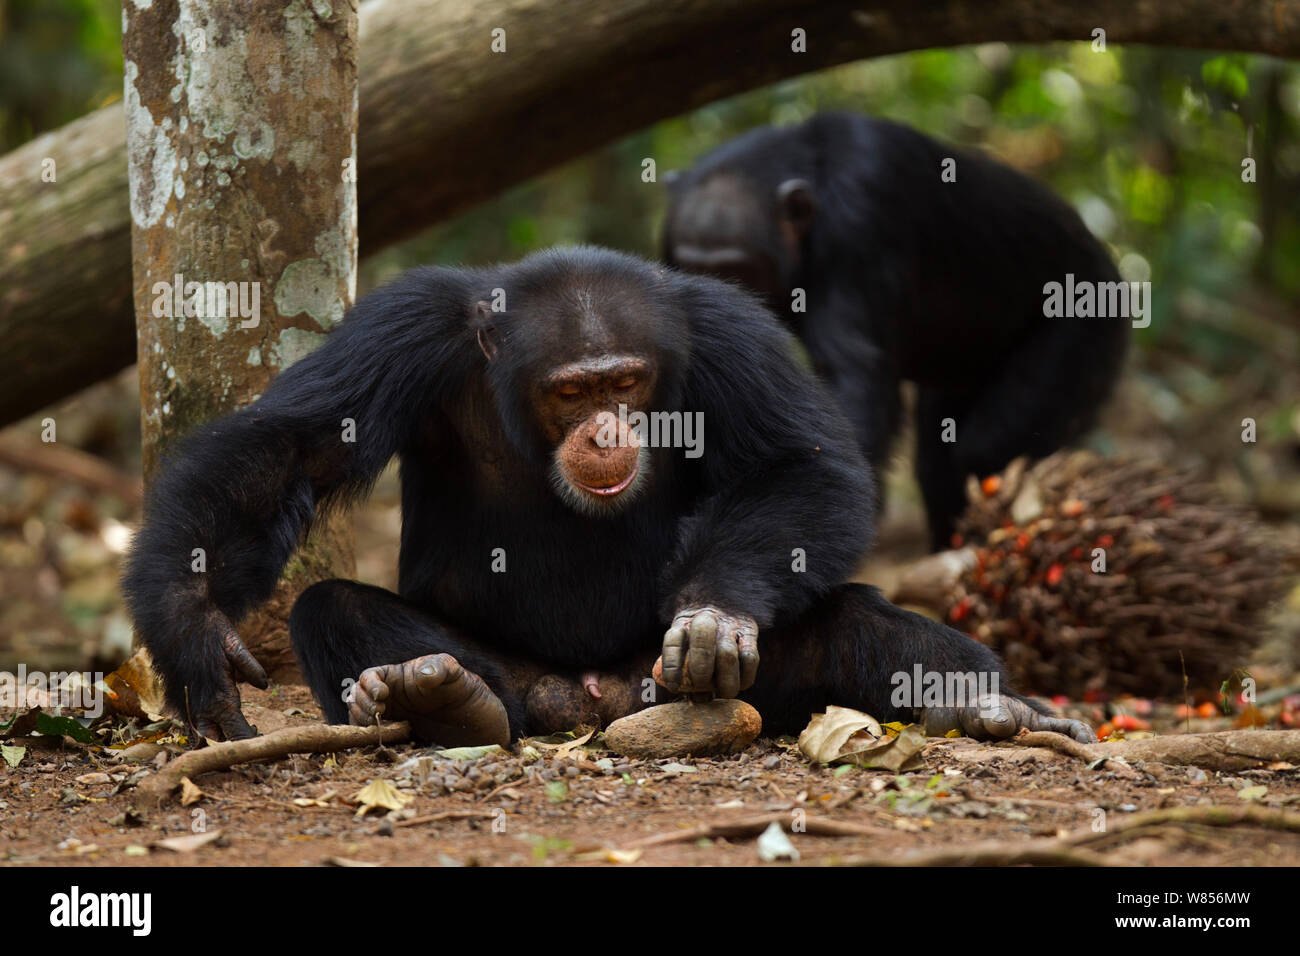 Western chimpanzee (Pan troglodytes verus)   young male 'Jeje' aged 13 years using rocks as tools to crack open palm oil nuts, Bossou Forest, Mont Nimba, Guinea. January 2011. Stock Photo